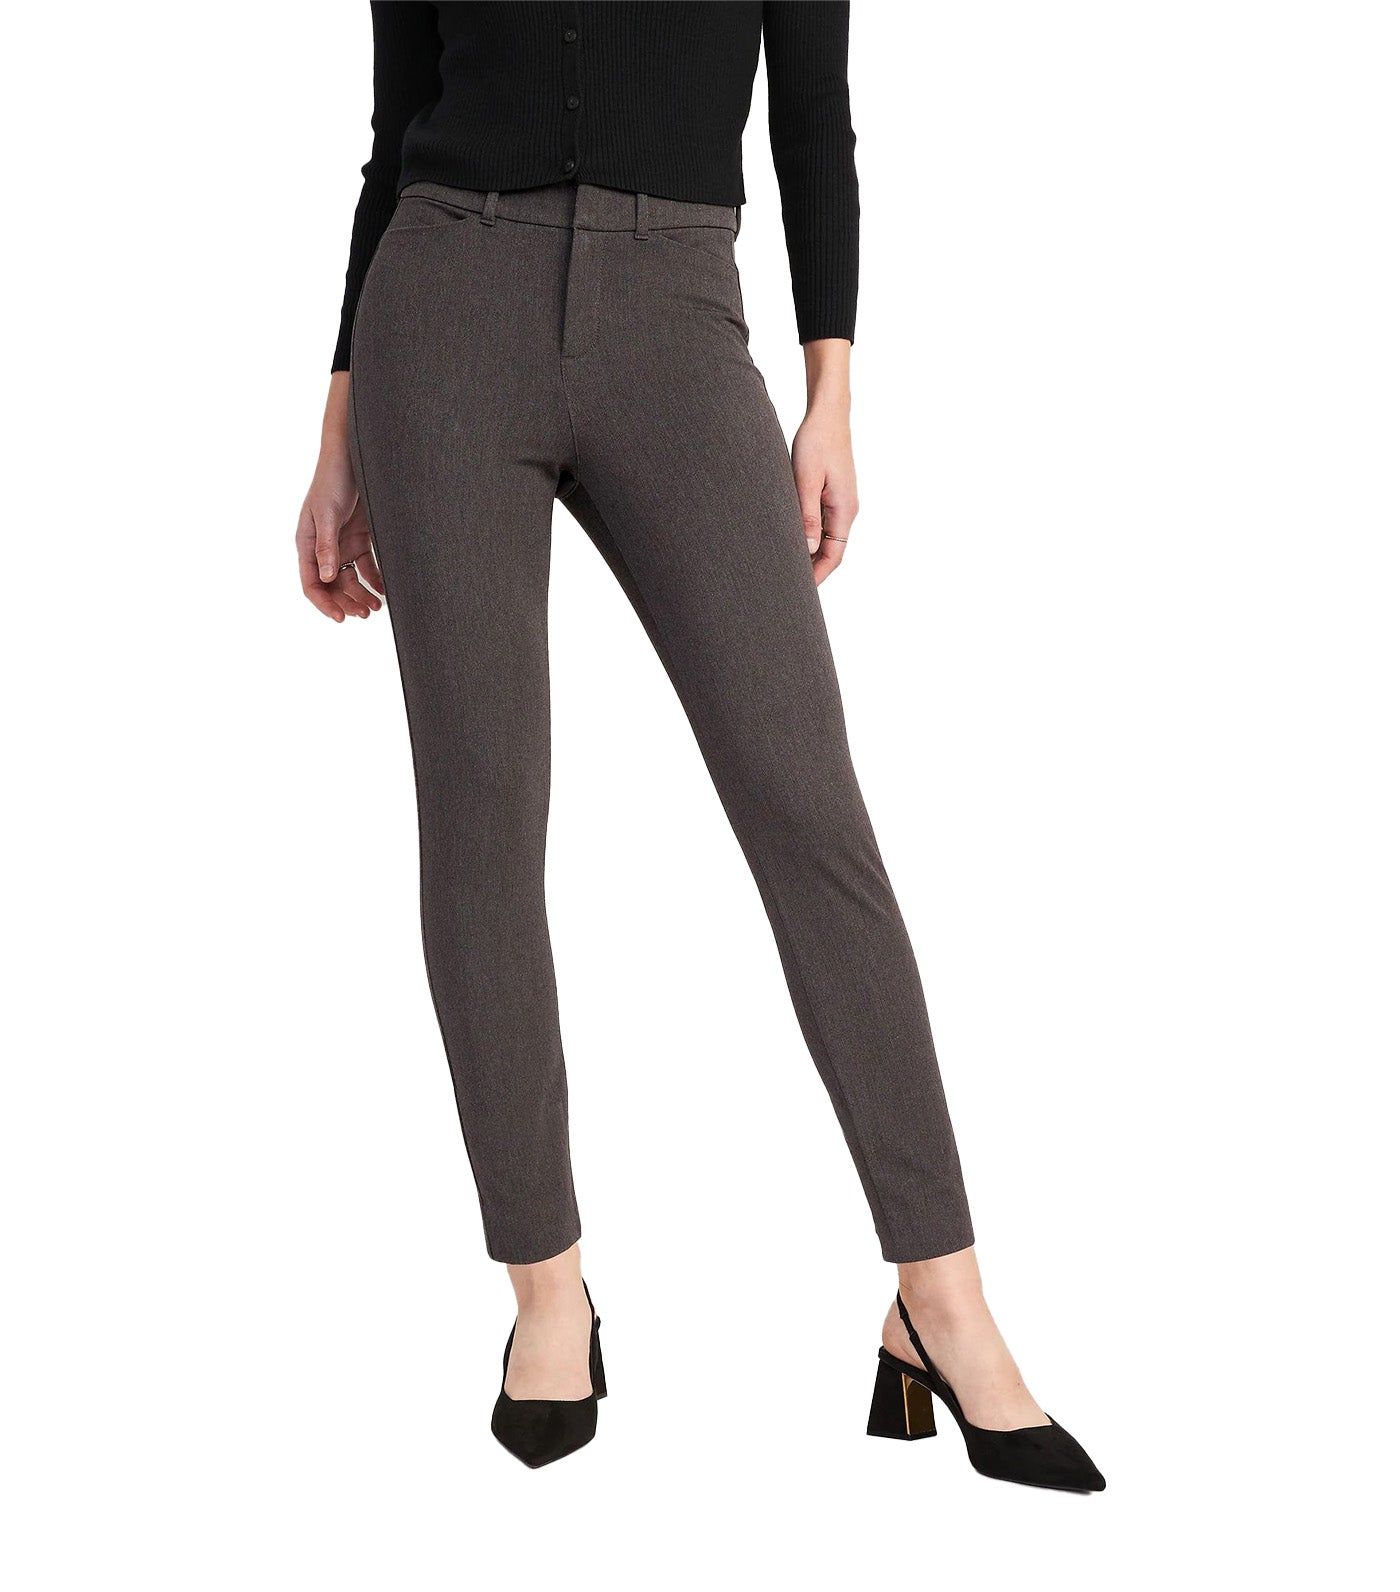 High-Waisted Pixie Skinny Ankle Pants for Women Dark Heather Gray